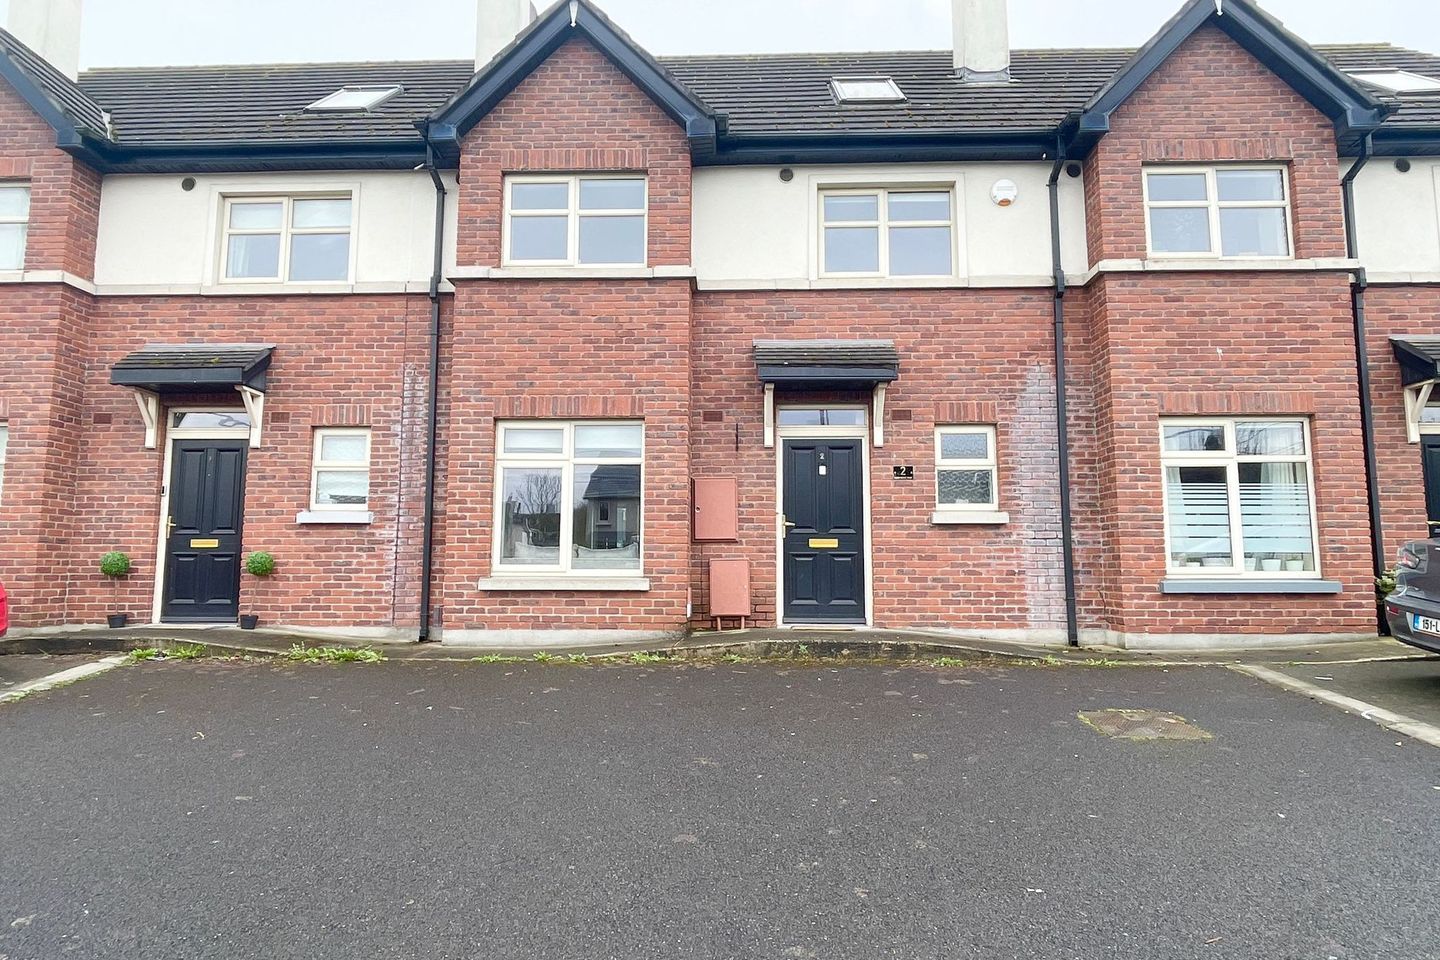 2 Cherrymount Court, Donore Road, Drogheda, Co. Louth